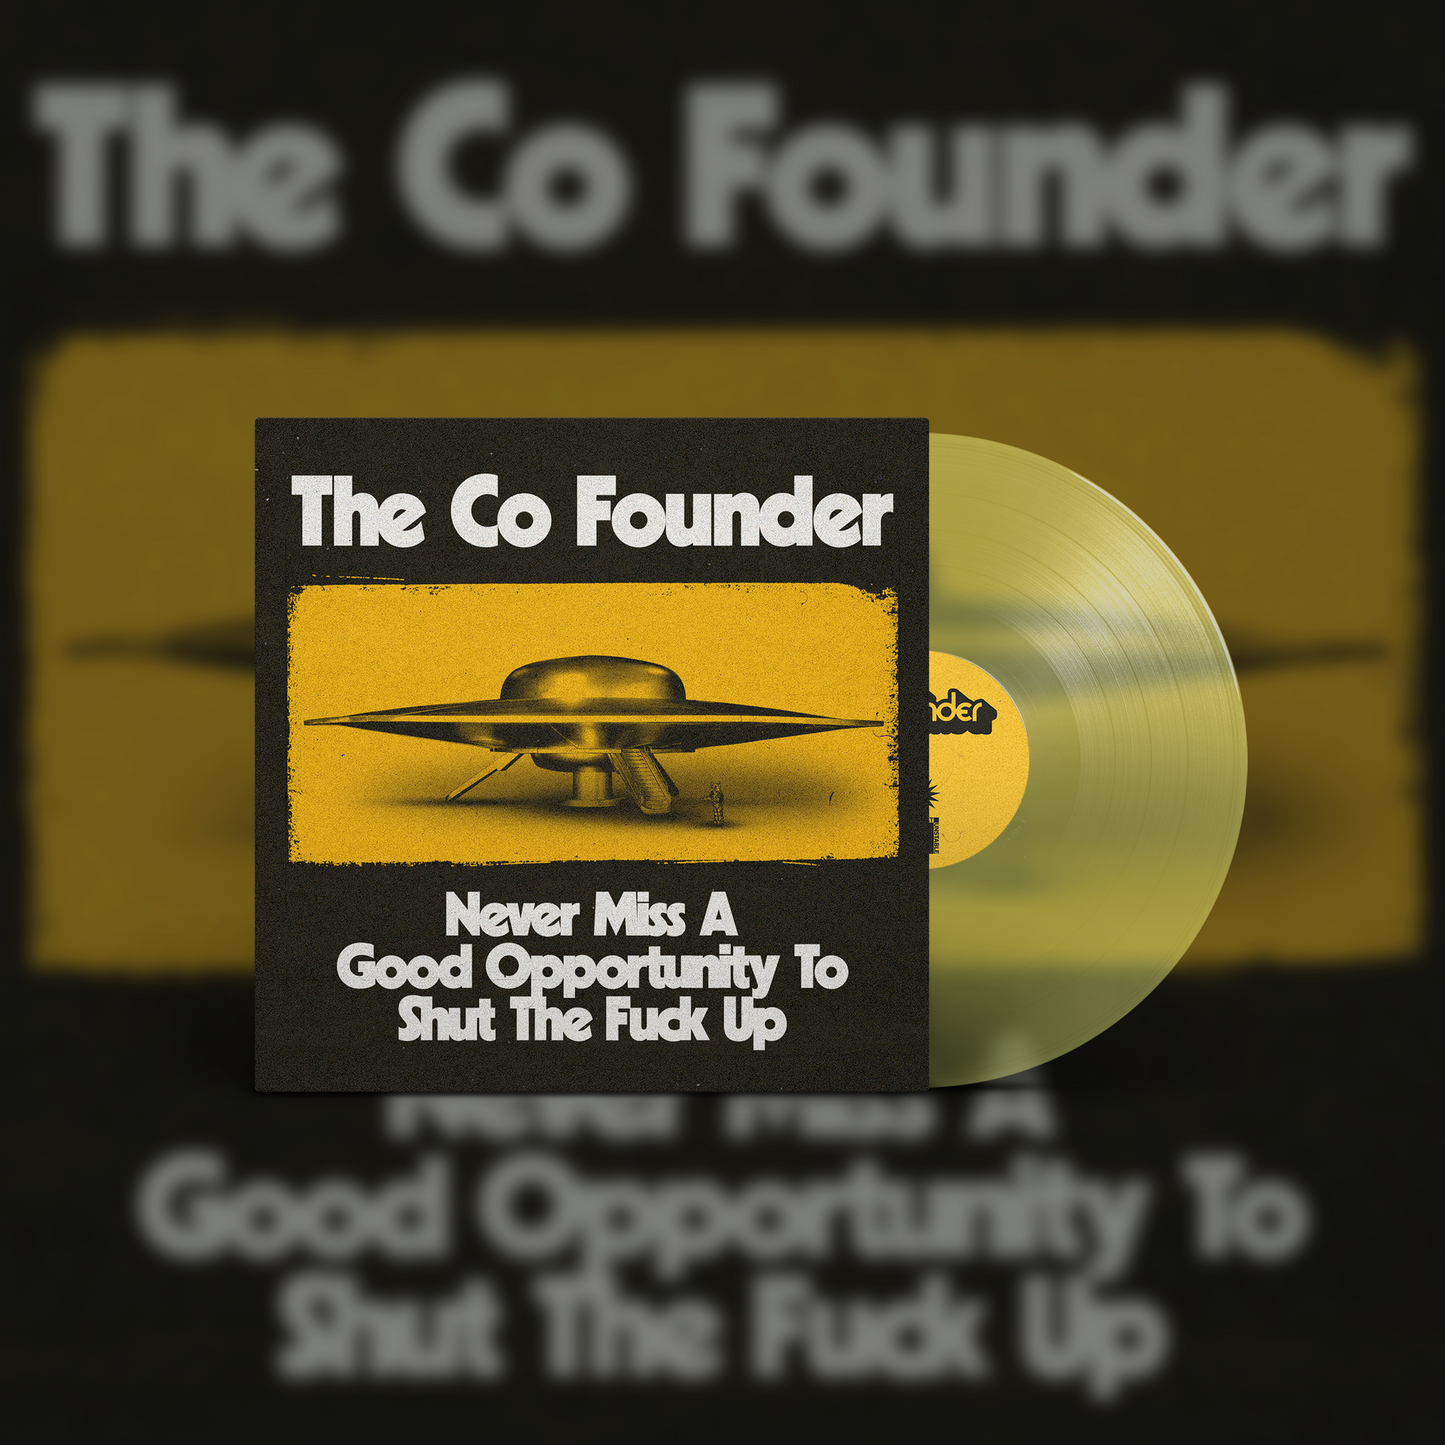 The Co Founder - "Never Miss A Good Opportunity To Shut The Fuck Up"